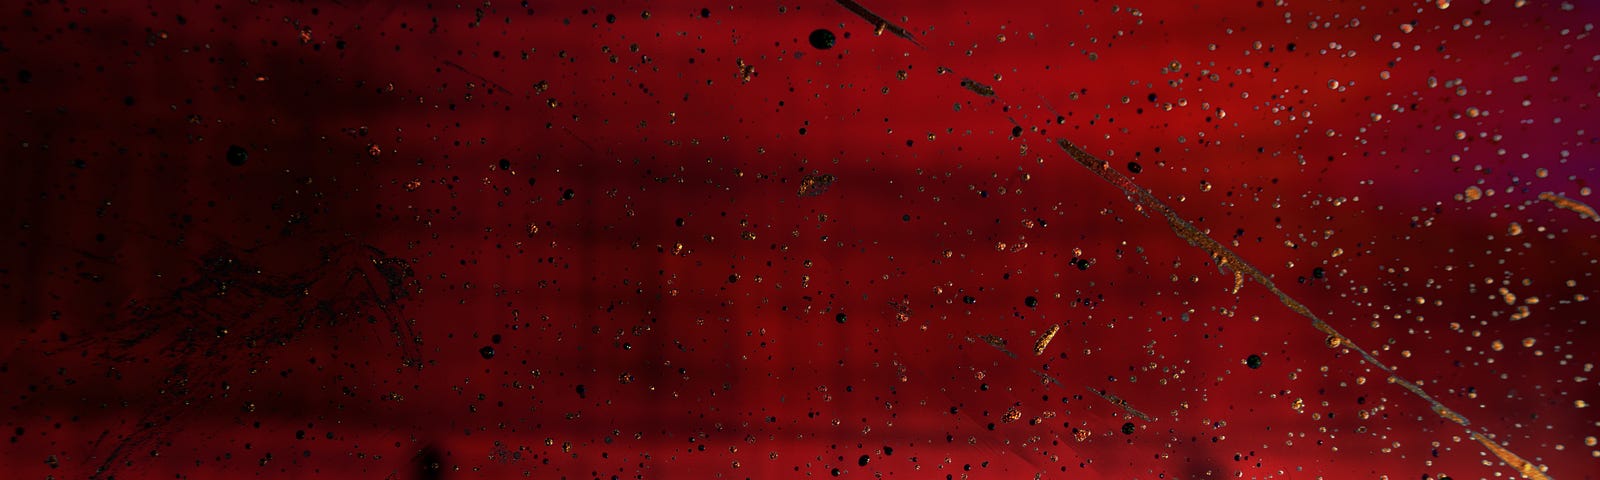 Abstract picture in red, hinting at blood smeared horizontally.